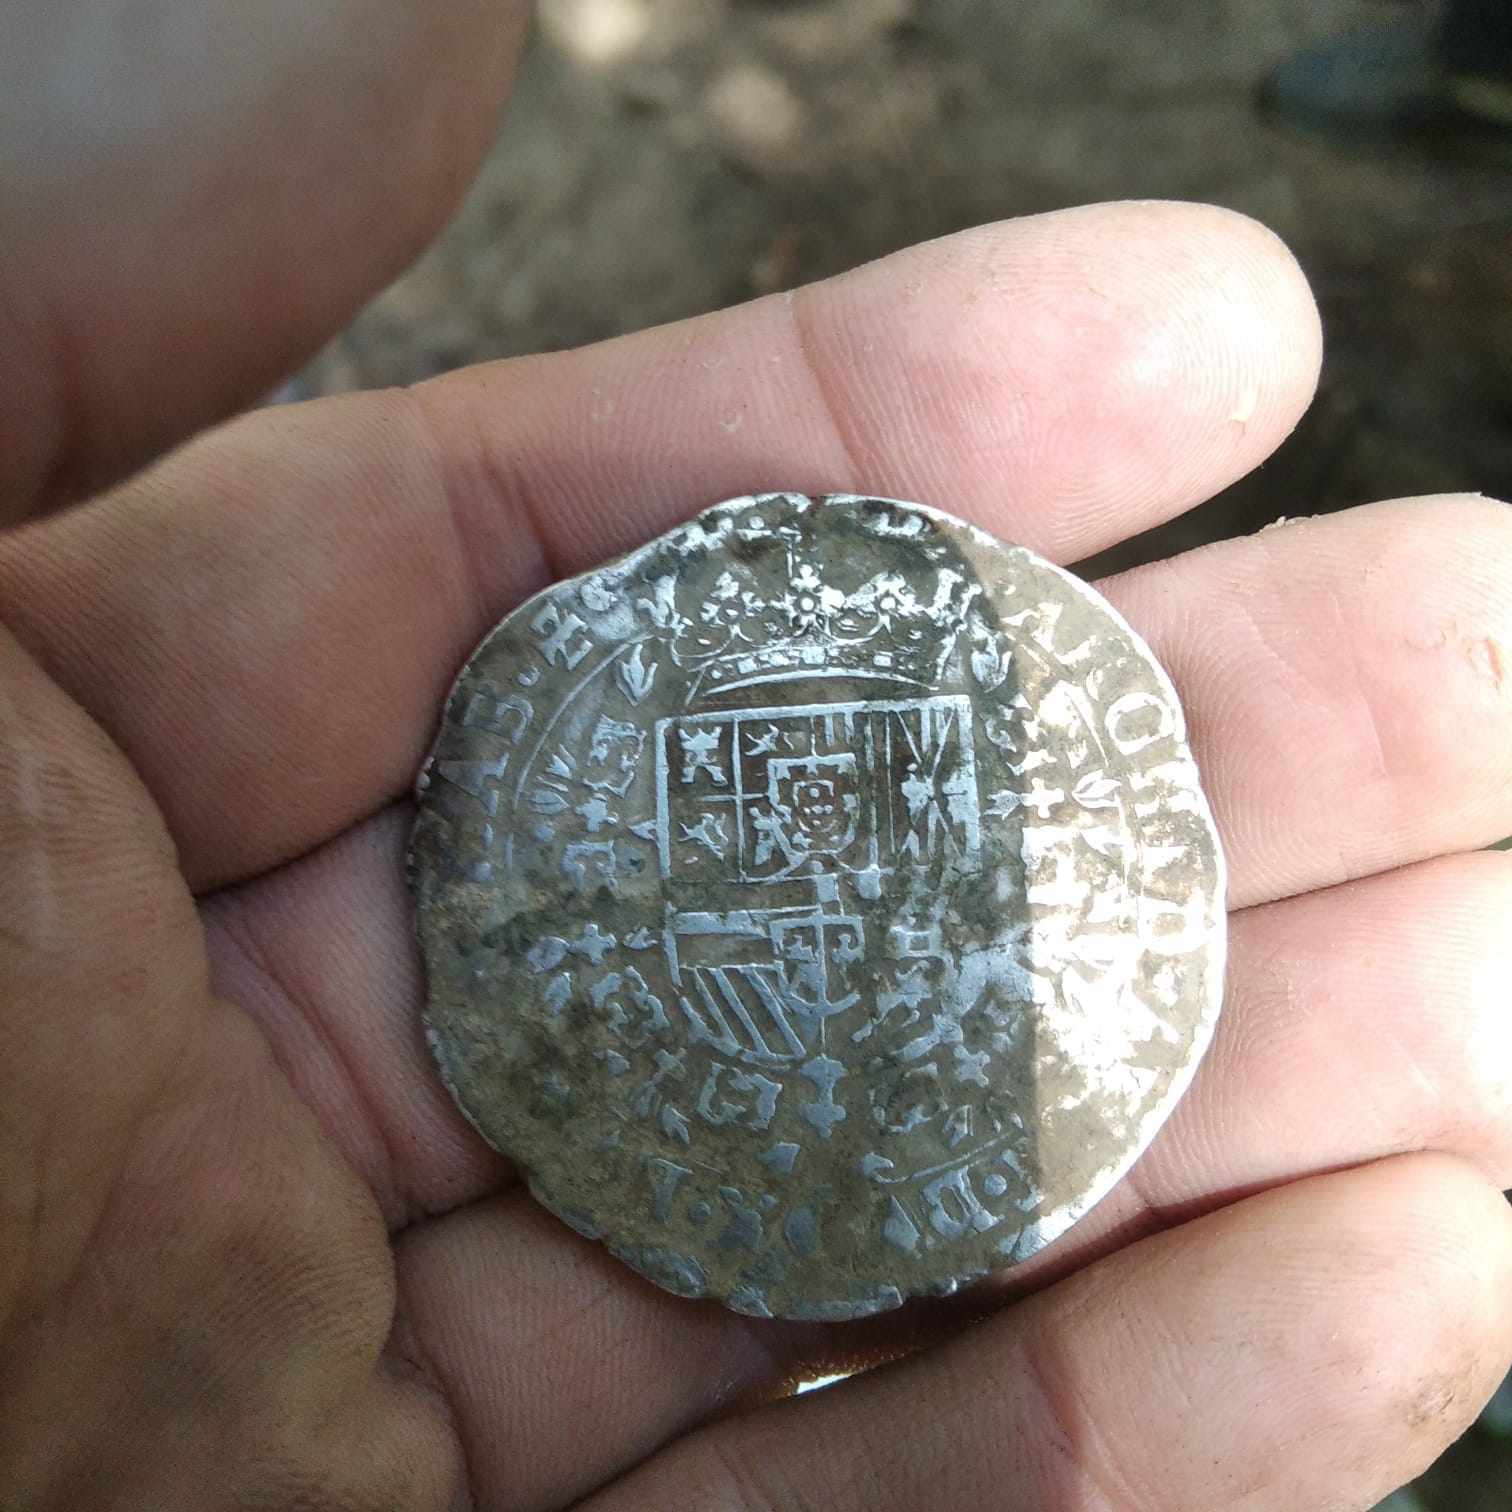 The legend of 300 years ago has been confirmed! A cache of coins of a famous swindler found in the mountains of Poland